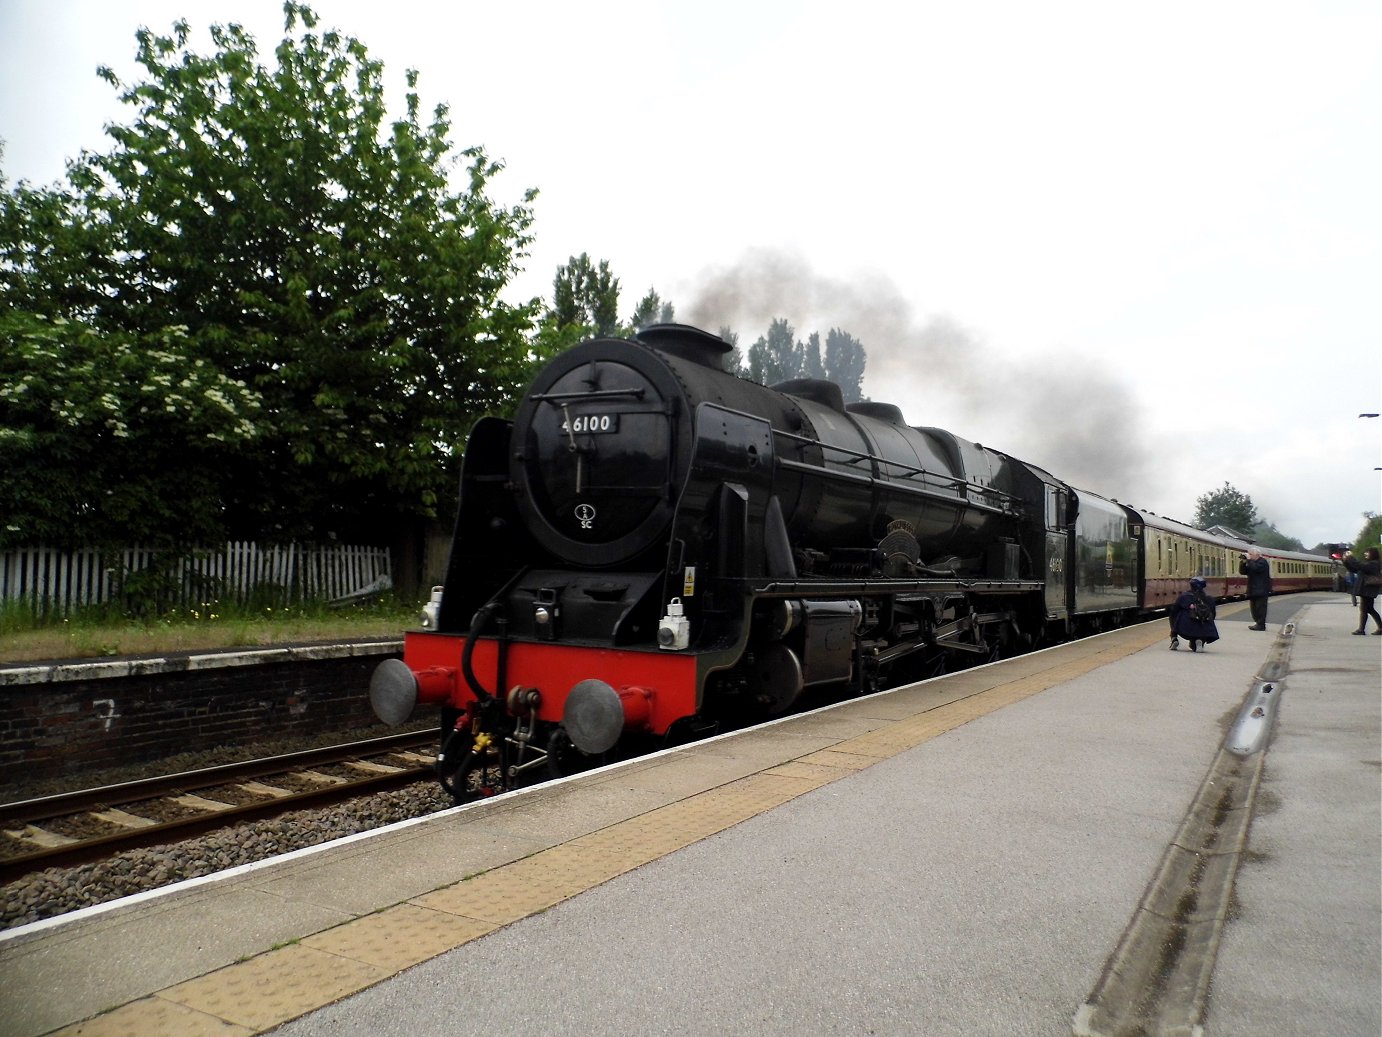 46100 Royal Scot on the Referendum Express, Castleford. Tuesday 14/6/2016. 